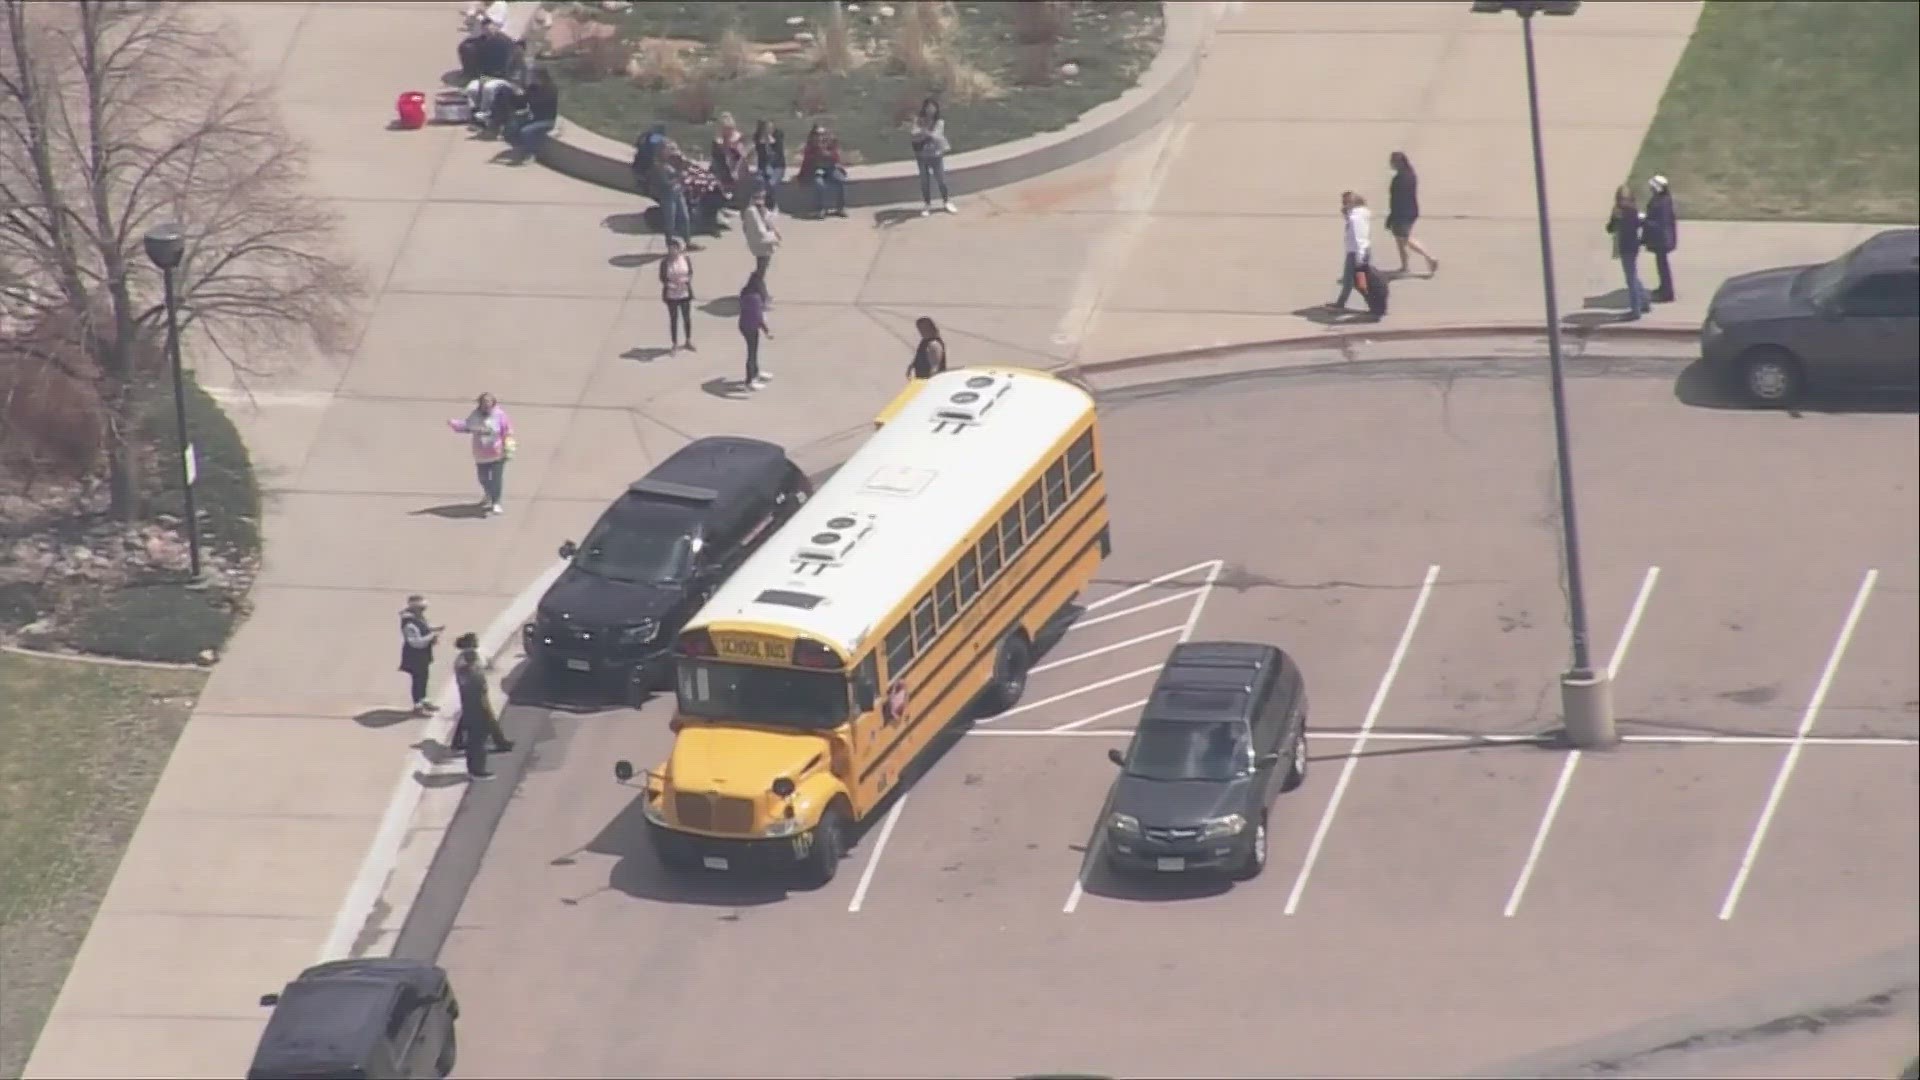 Chaparral High School students were dismissed at 1:15 p.m. Friday after being evacuated due to a reported threat, the Douglas County Sheriff's Office said.